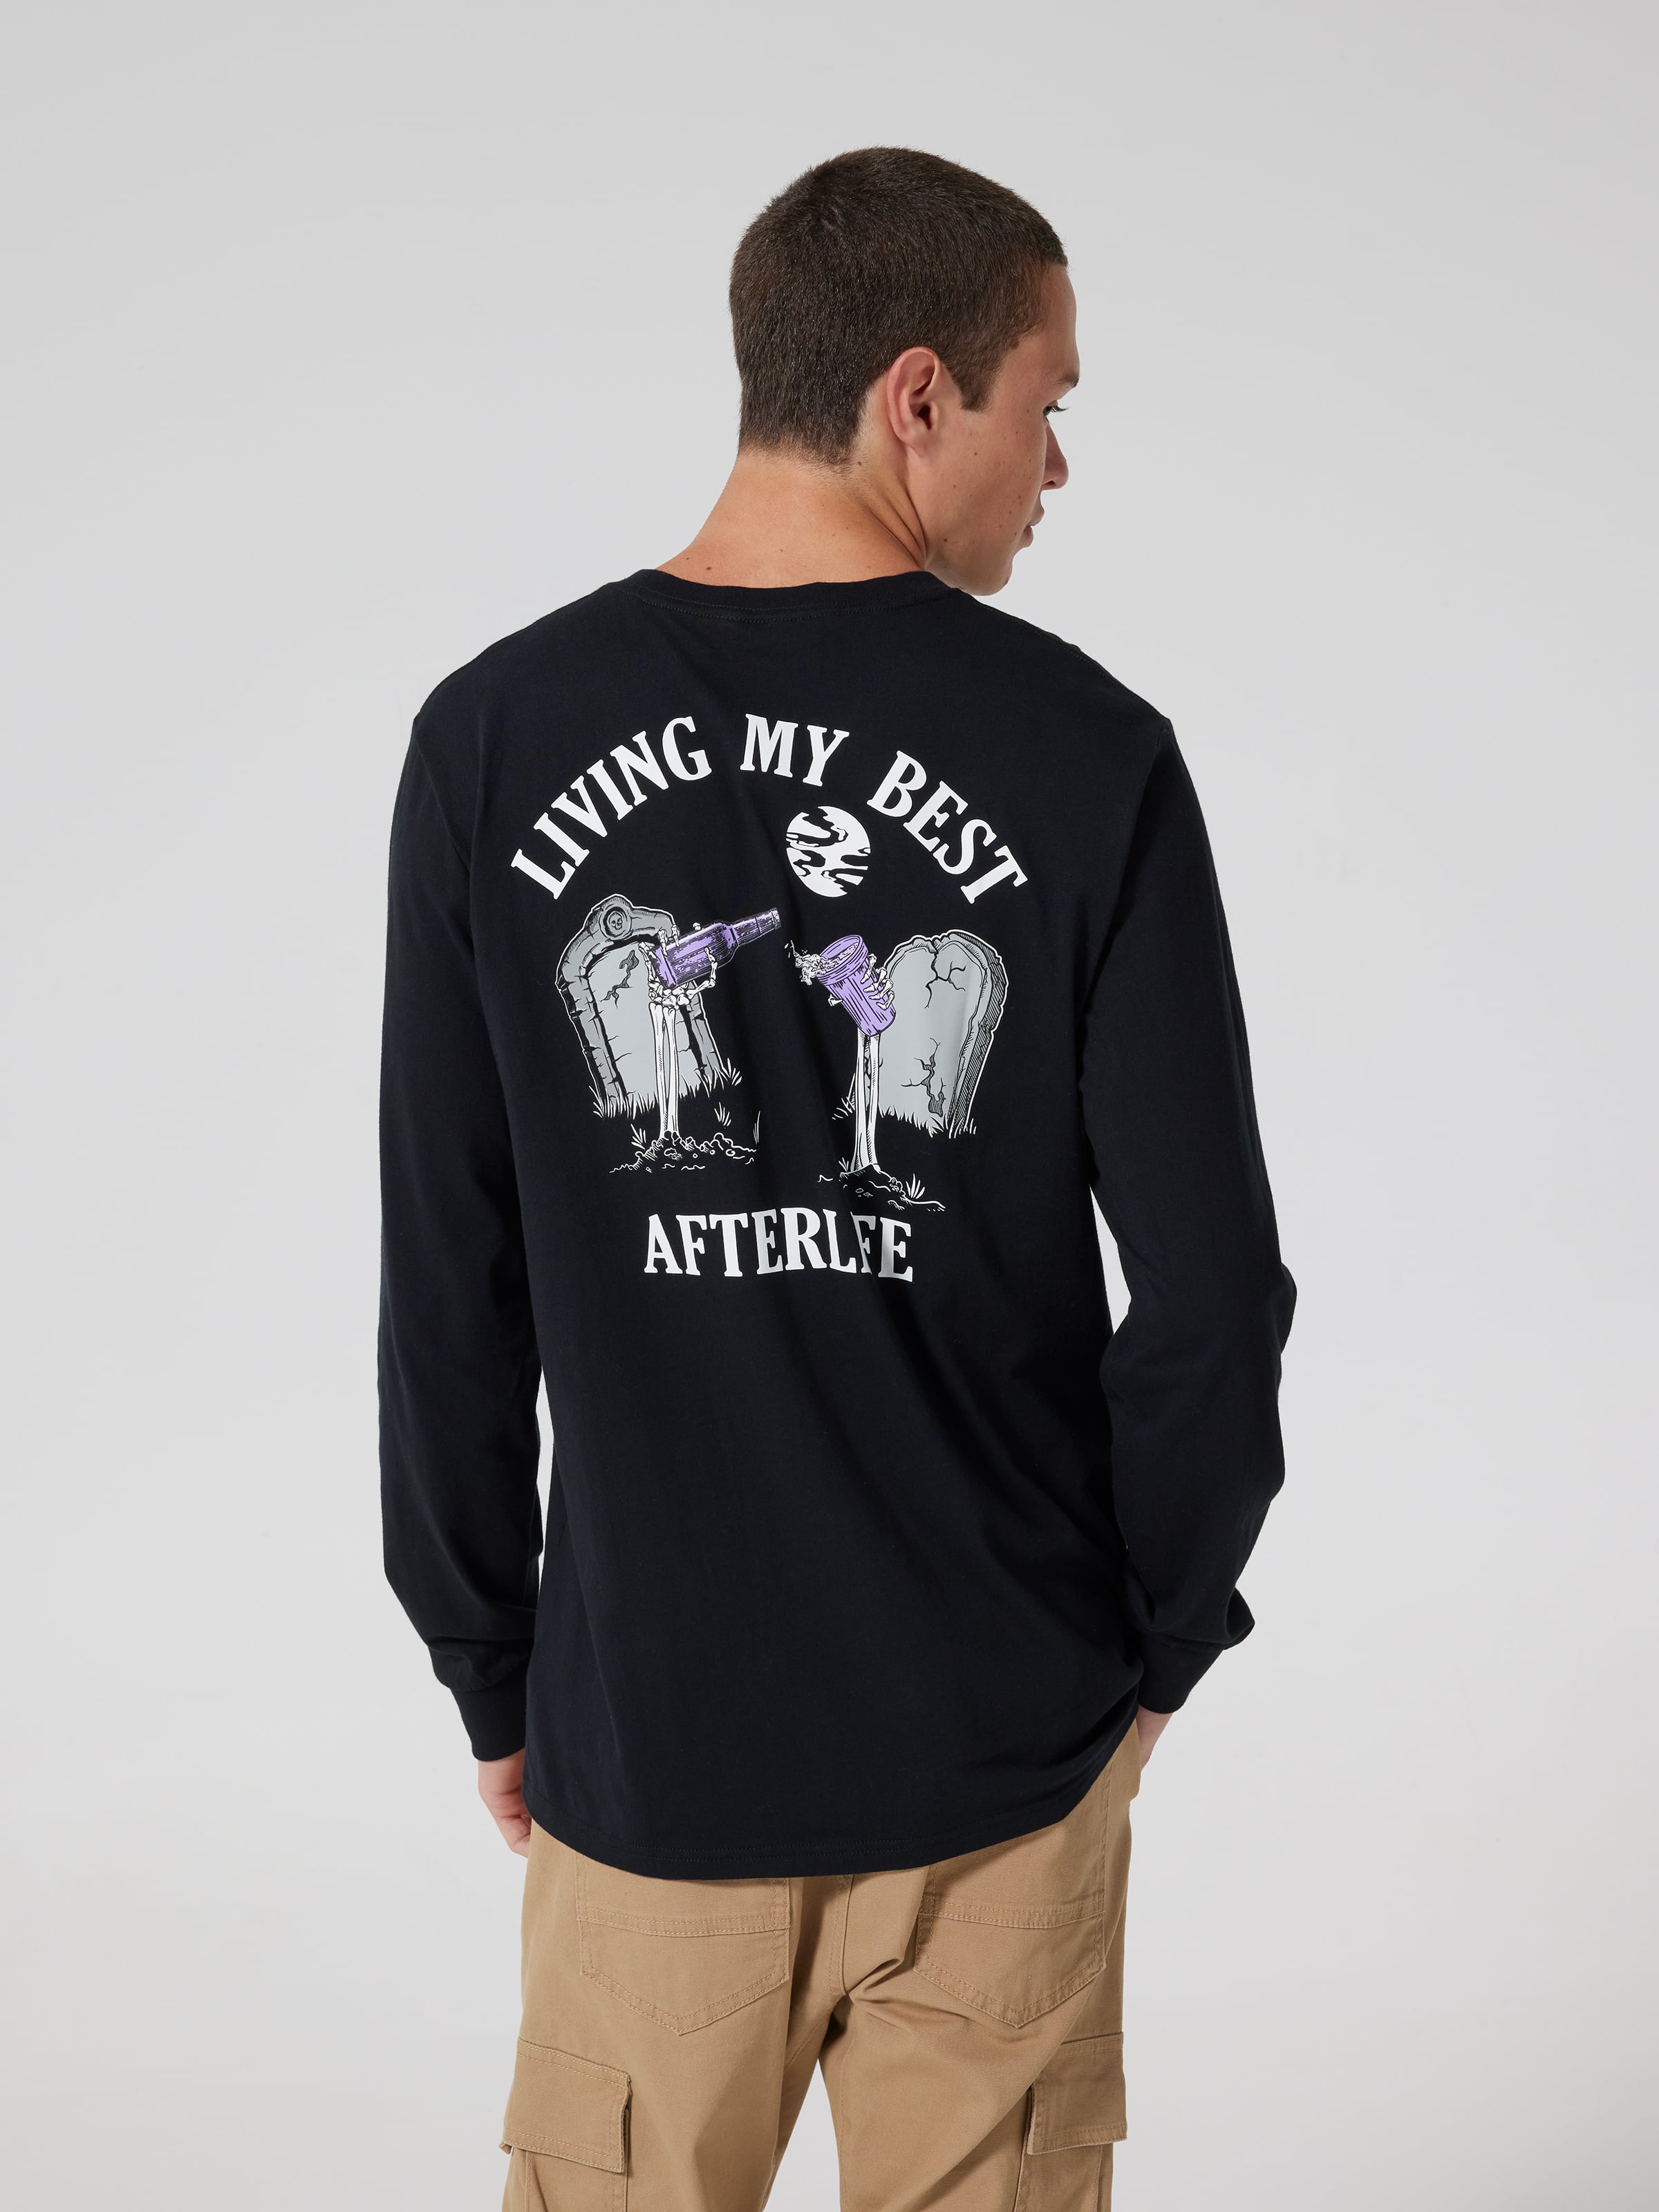 Surf Afterlife Long Sleeve Tee